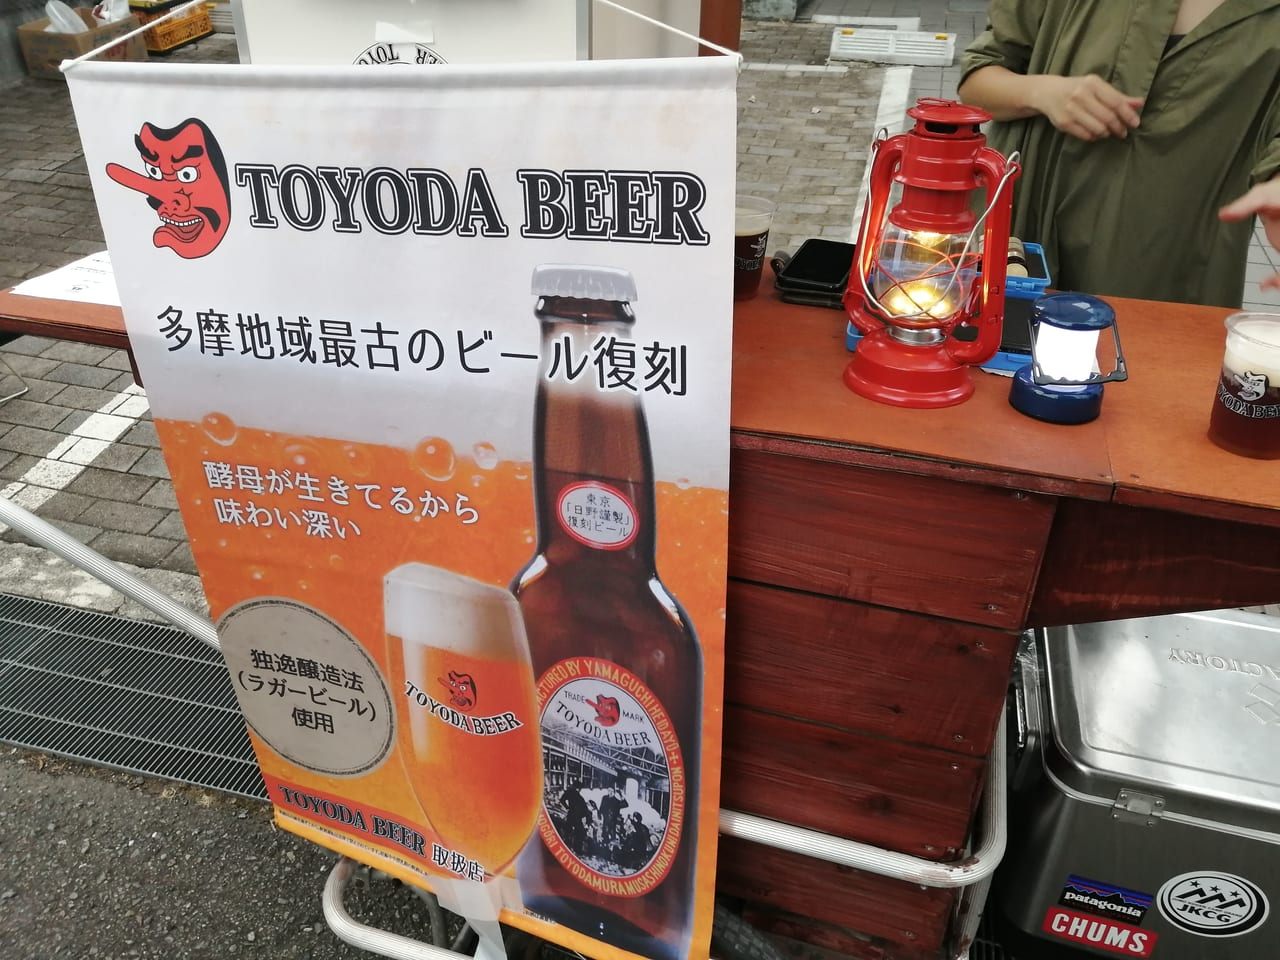 TOYODABEER生ビール